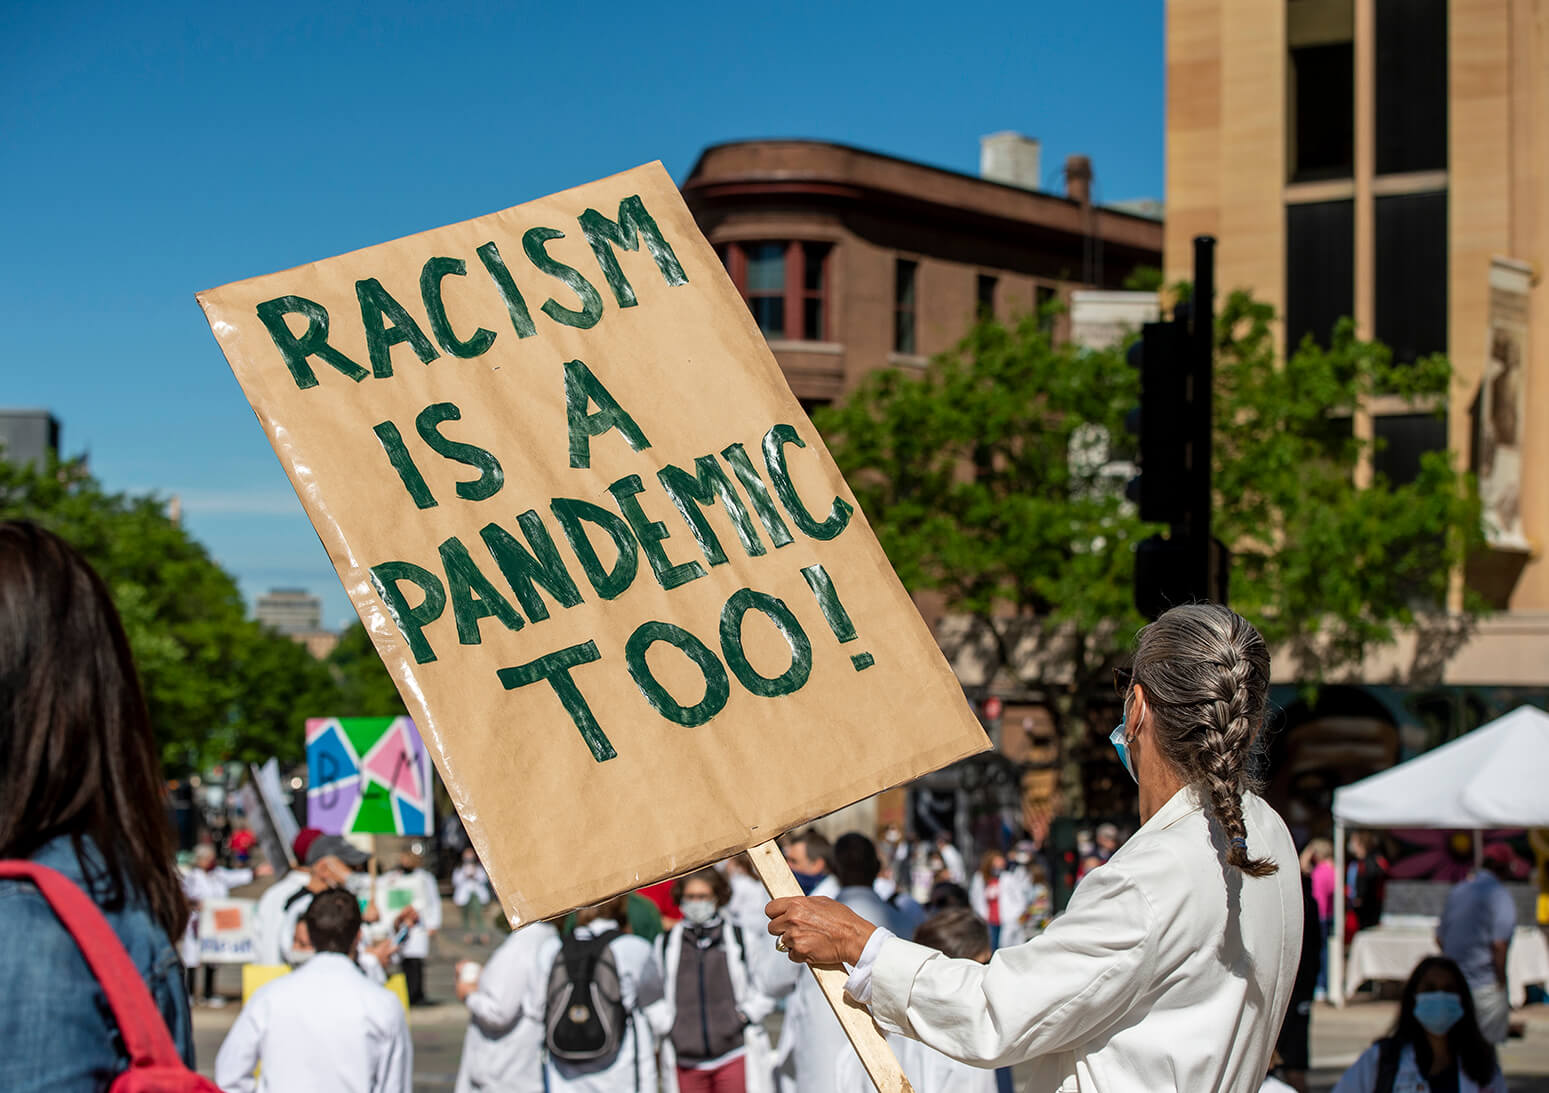 Woman in white coat and mask with sign reading "Racism is a pandemic too"